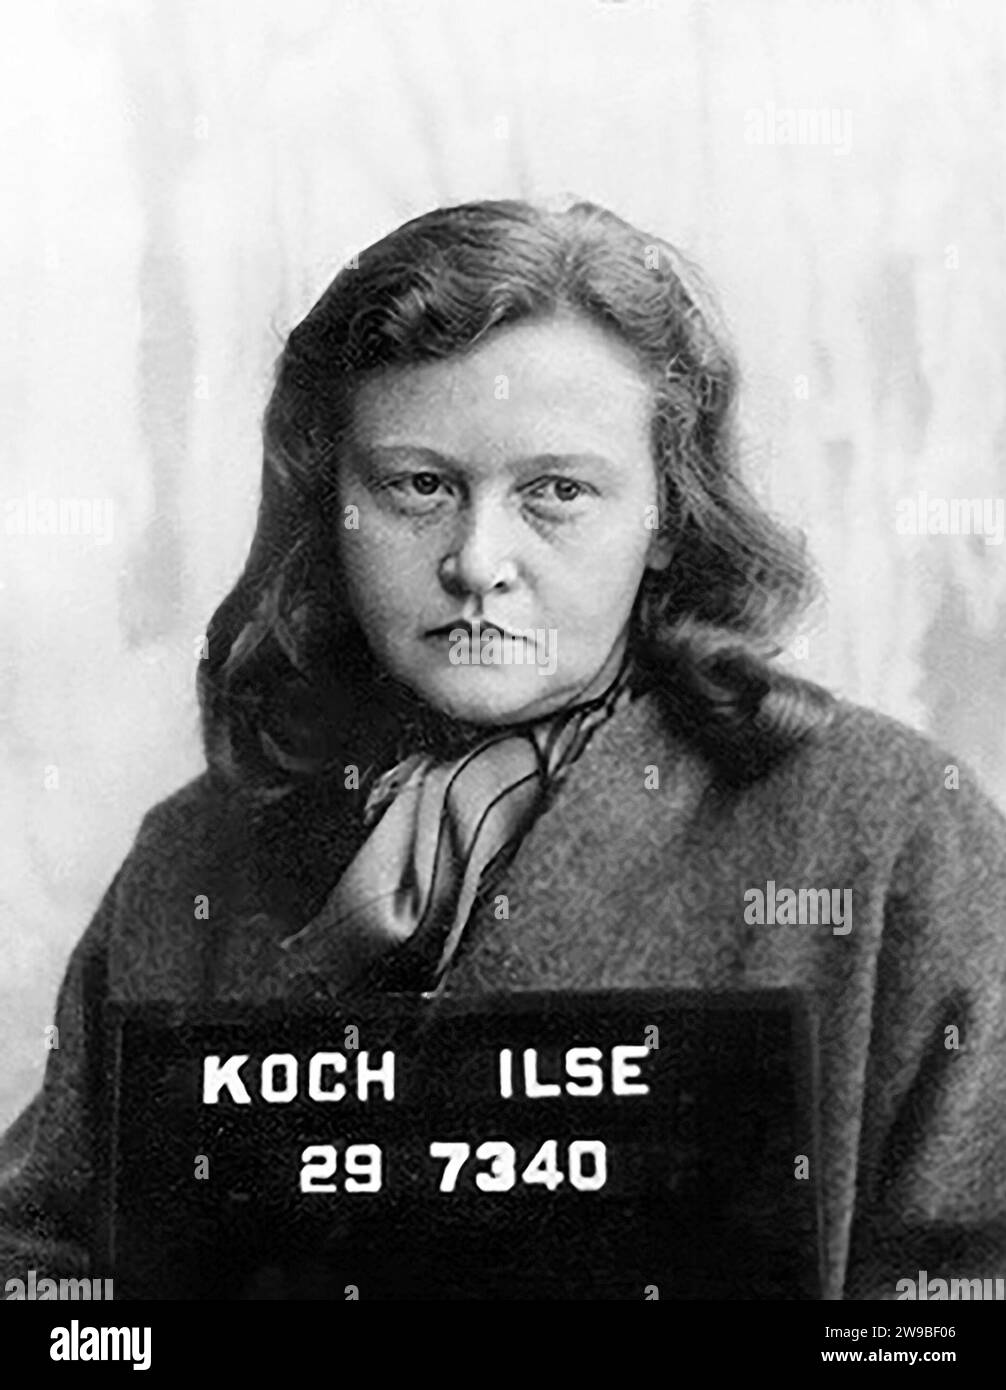 Ilse Koch. Portrait of the German war criminal, Ilse Koch (1906-1967), c. 1945. Koch was the wife of Karl Koch who was commandant of the concentration camp at Buchenwald, Stock Photo